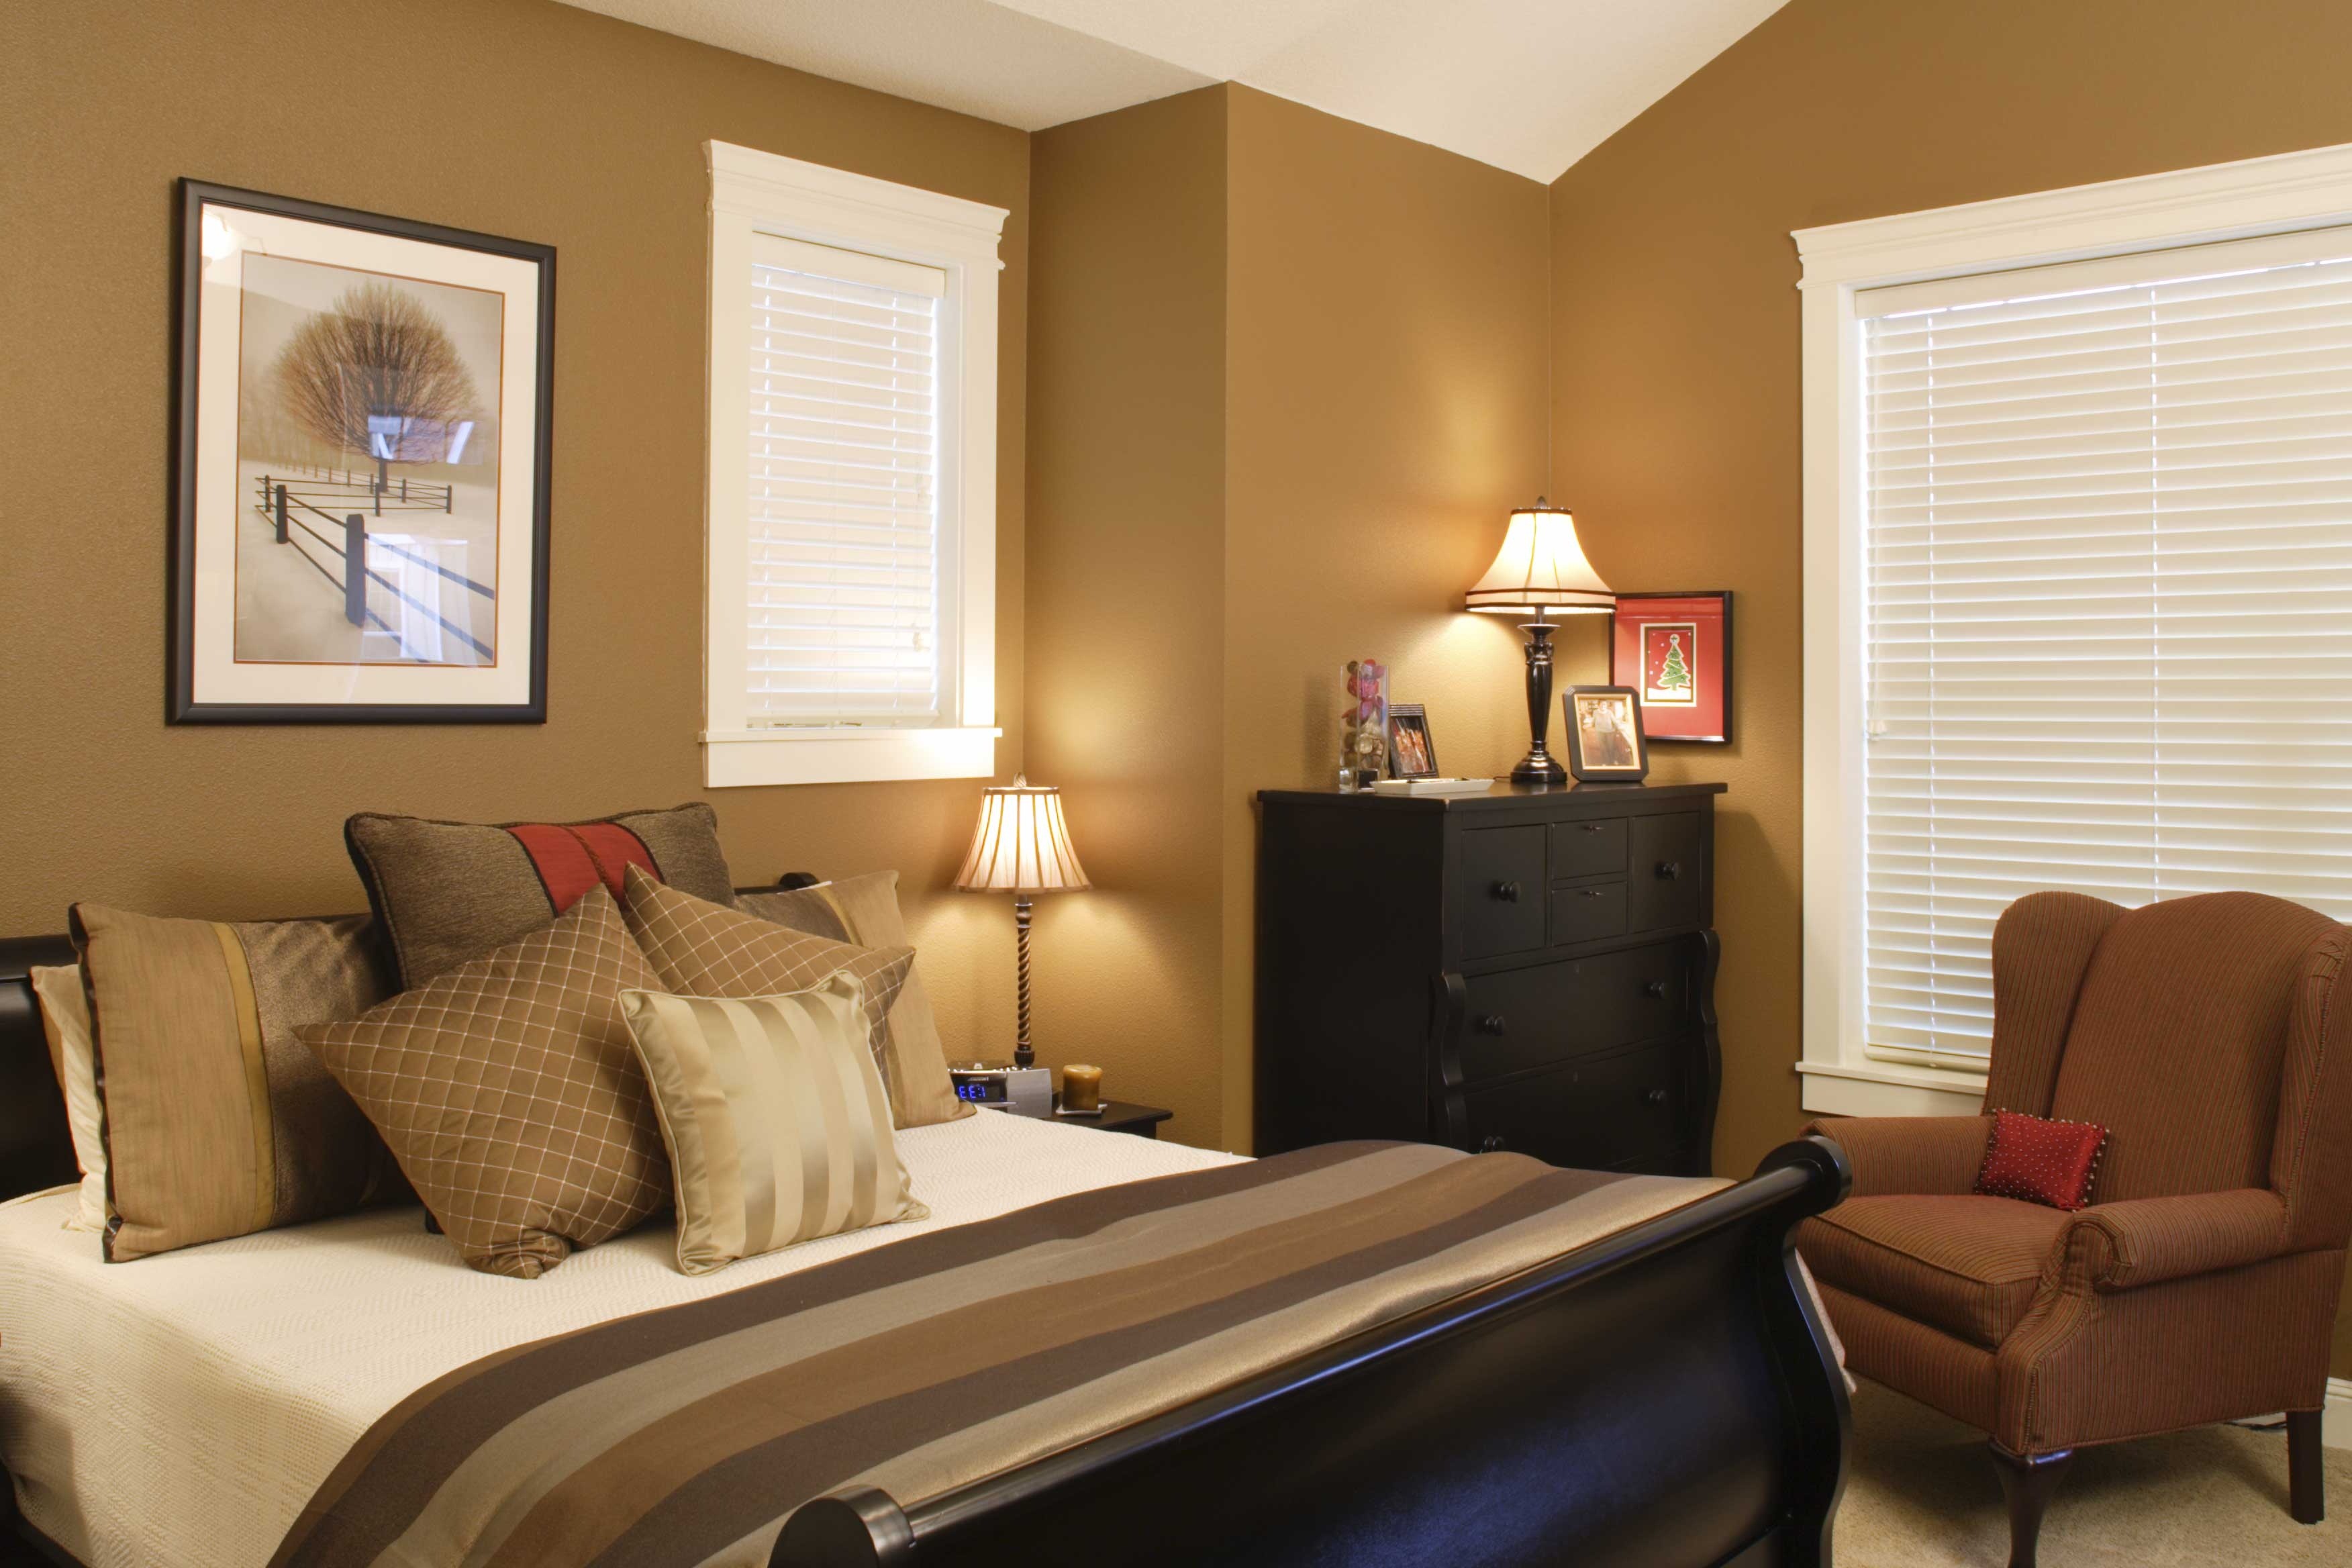 Brown For Colors Fascinating Brown For Calming Paint Colors In Bedroom With Wide Bed And Beige Arm Sofa Bedroom Calming Paint Colors For Bedroom